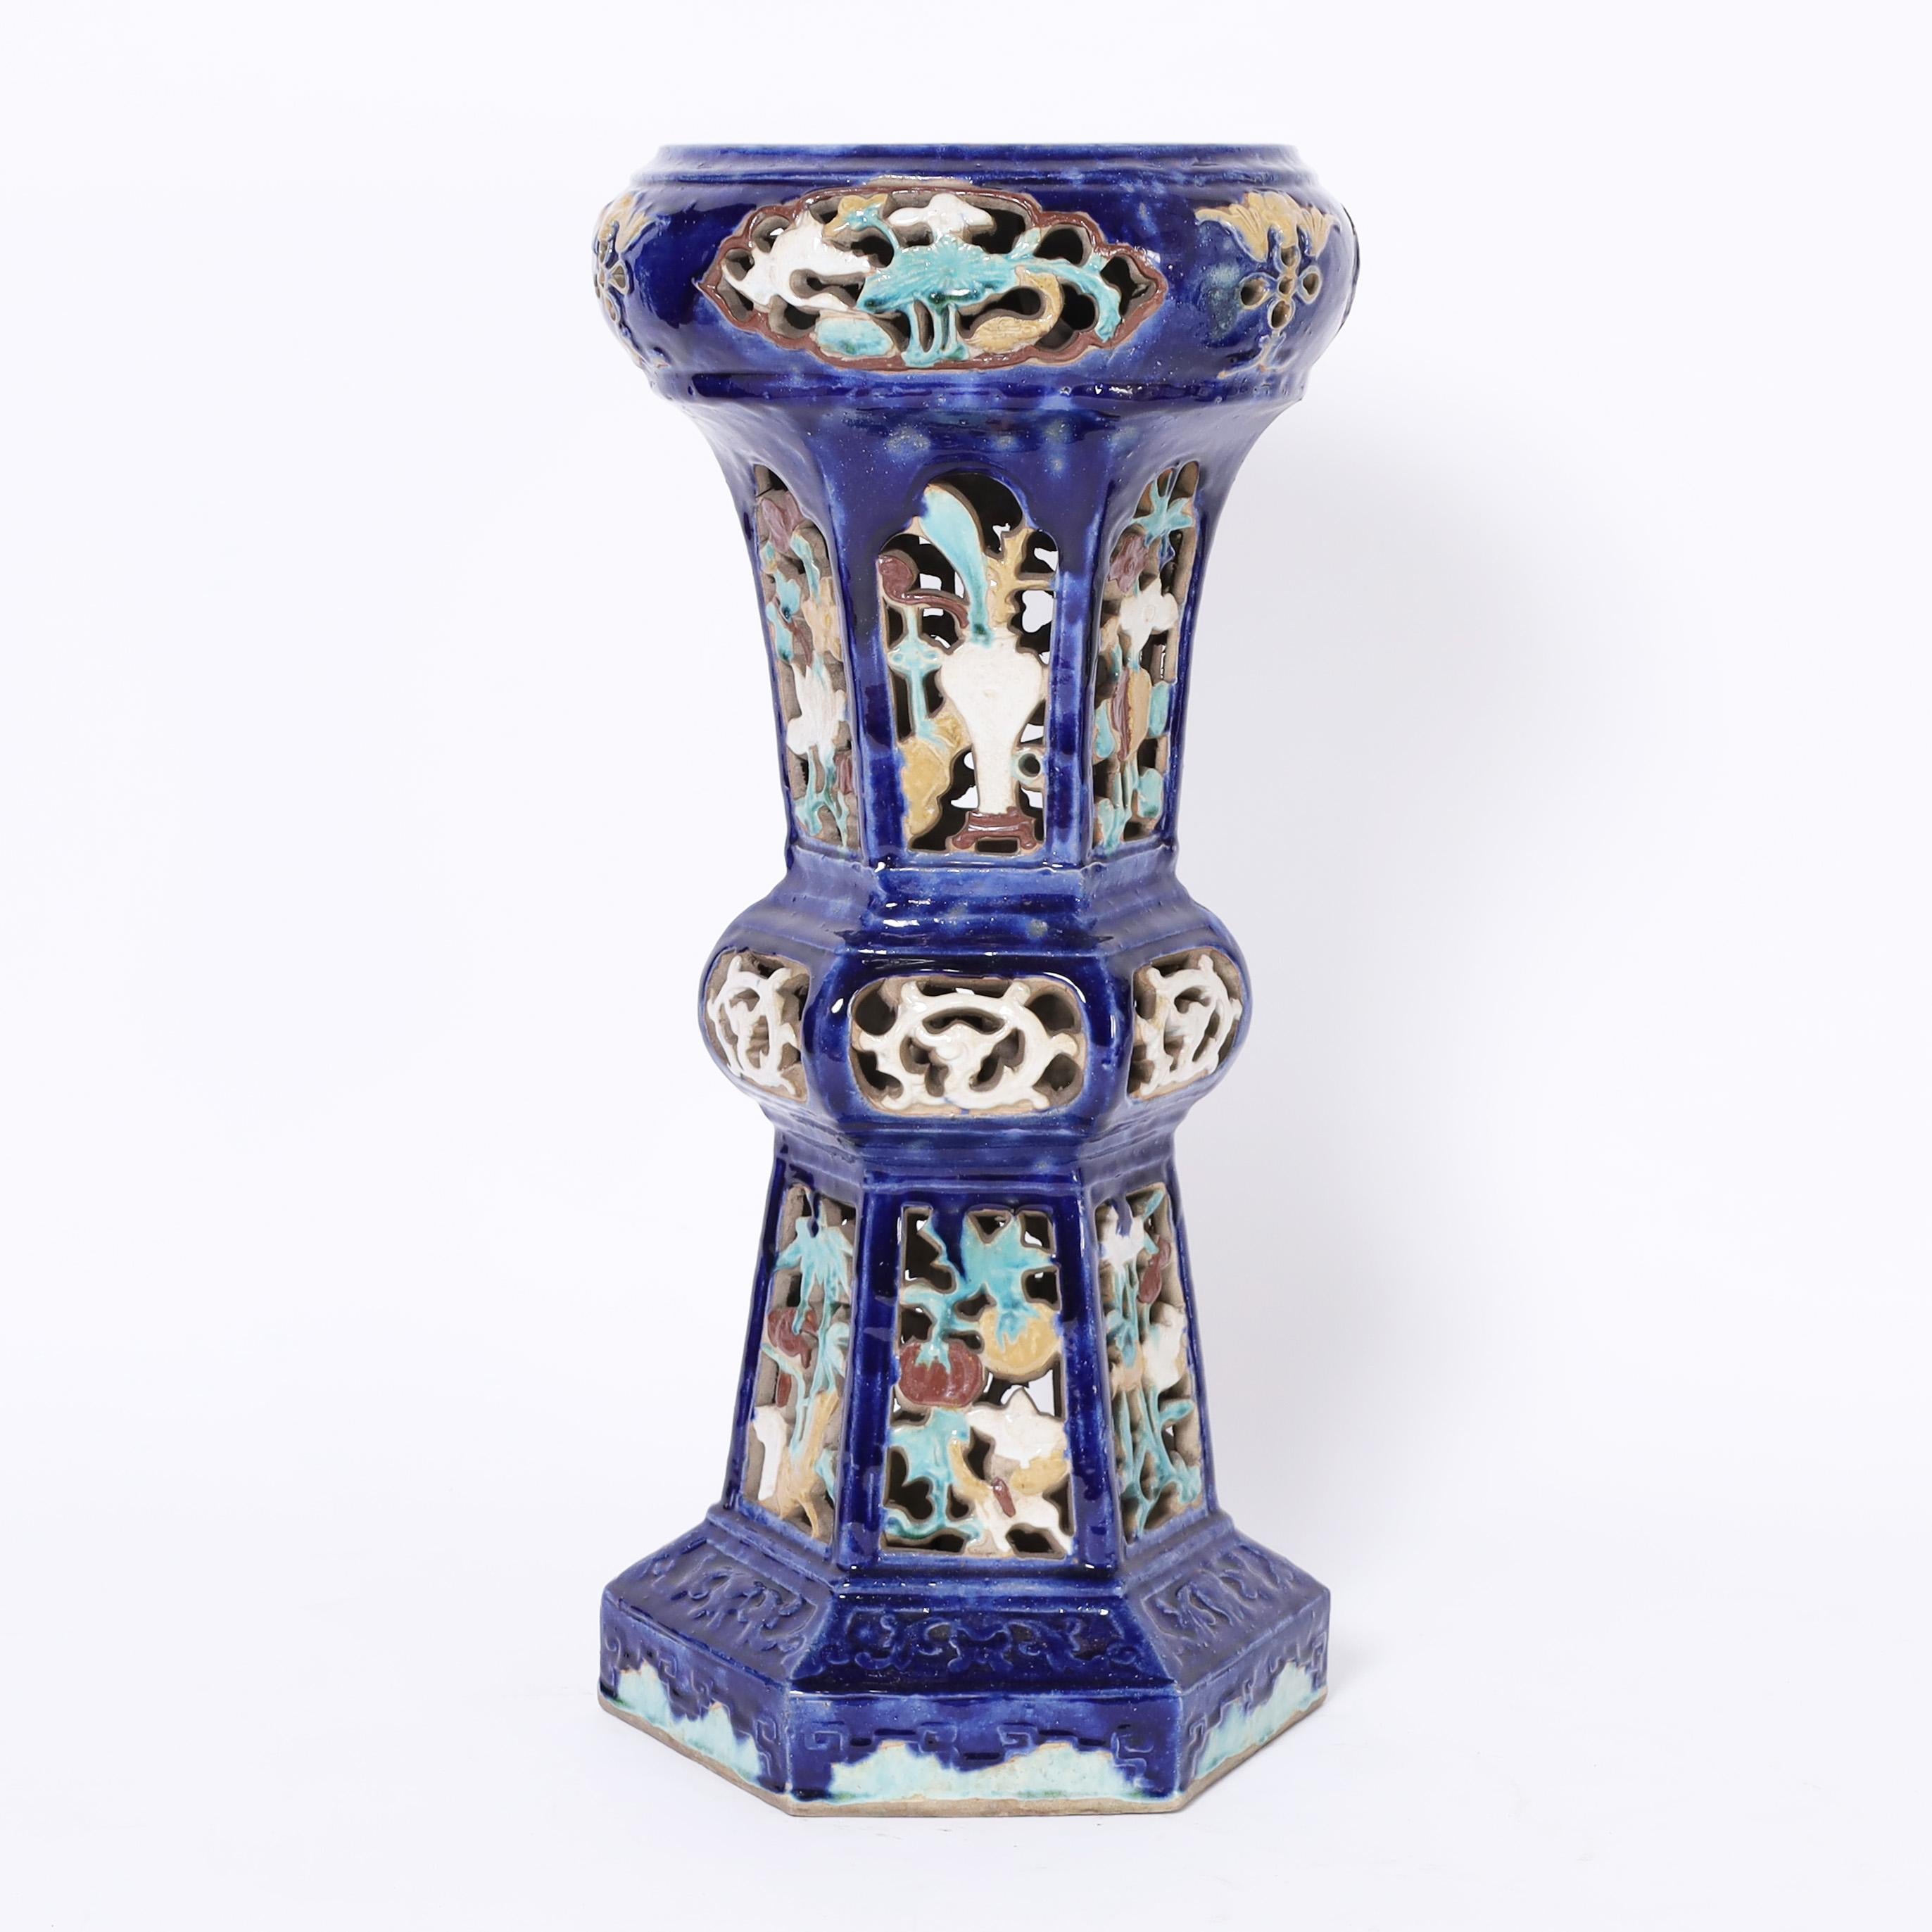 Striking pair of vintage Chinese pedestals handcrafted in terracotta in classic form with open fretwork, decorated in soft floral colors on an alluring cobalt blue background.

From left to right:

H: 29.5 DM: 14
H: 31.5 DM: 14